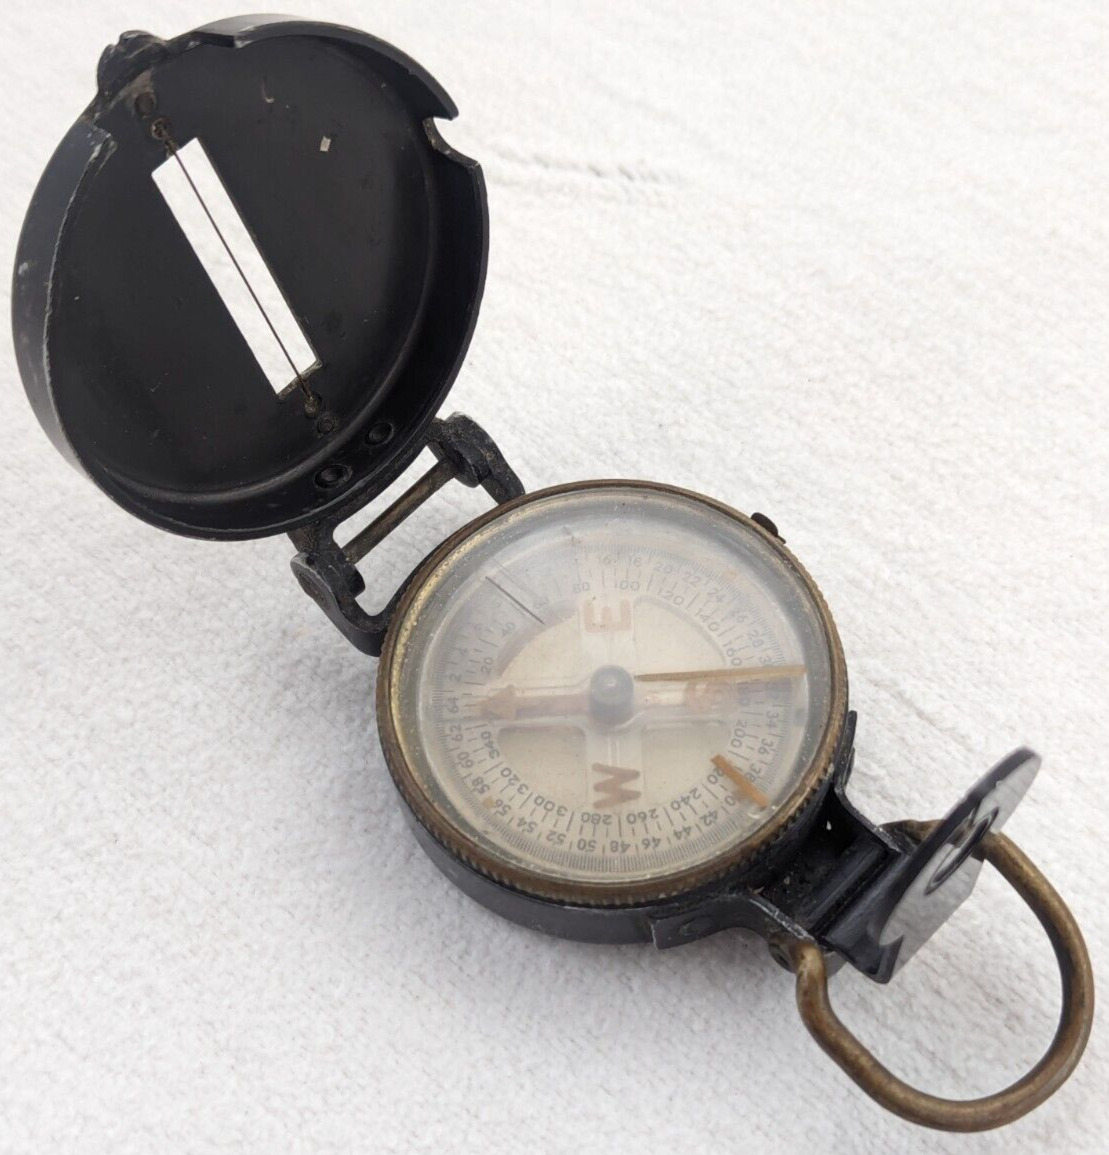 Superior Magneto Corp Black Compass 8-45 US Army Corps of Engineers 1945 Vintage